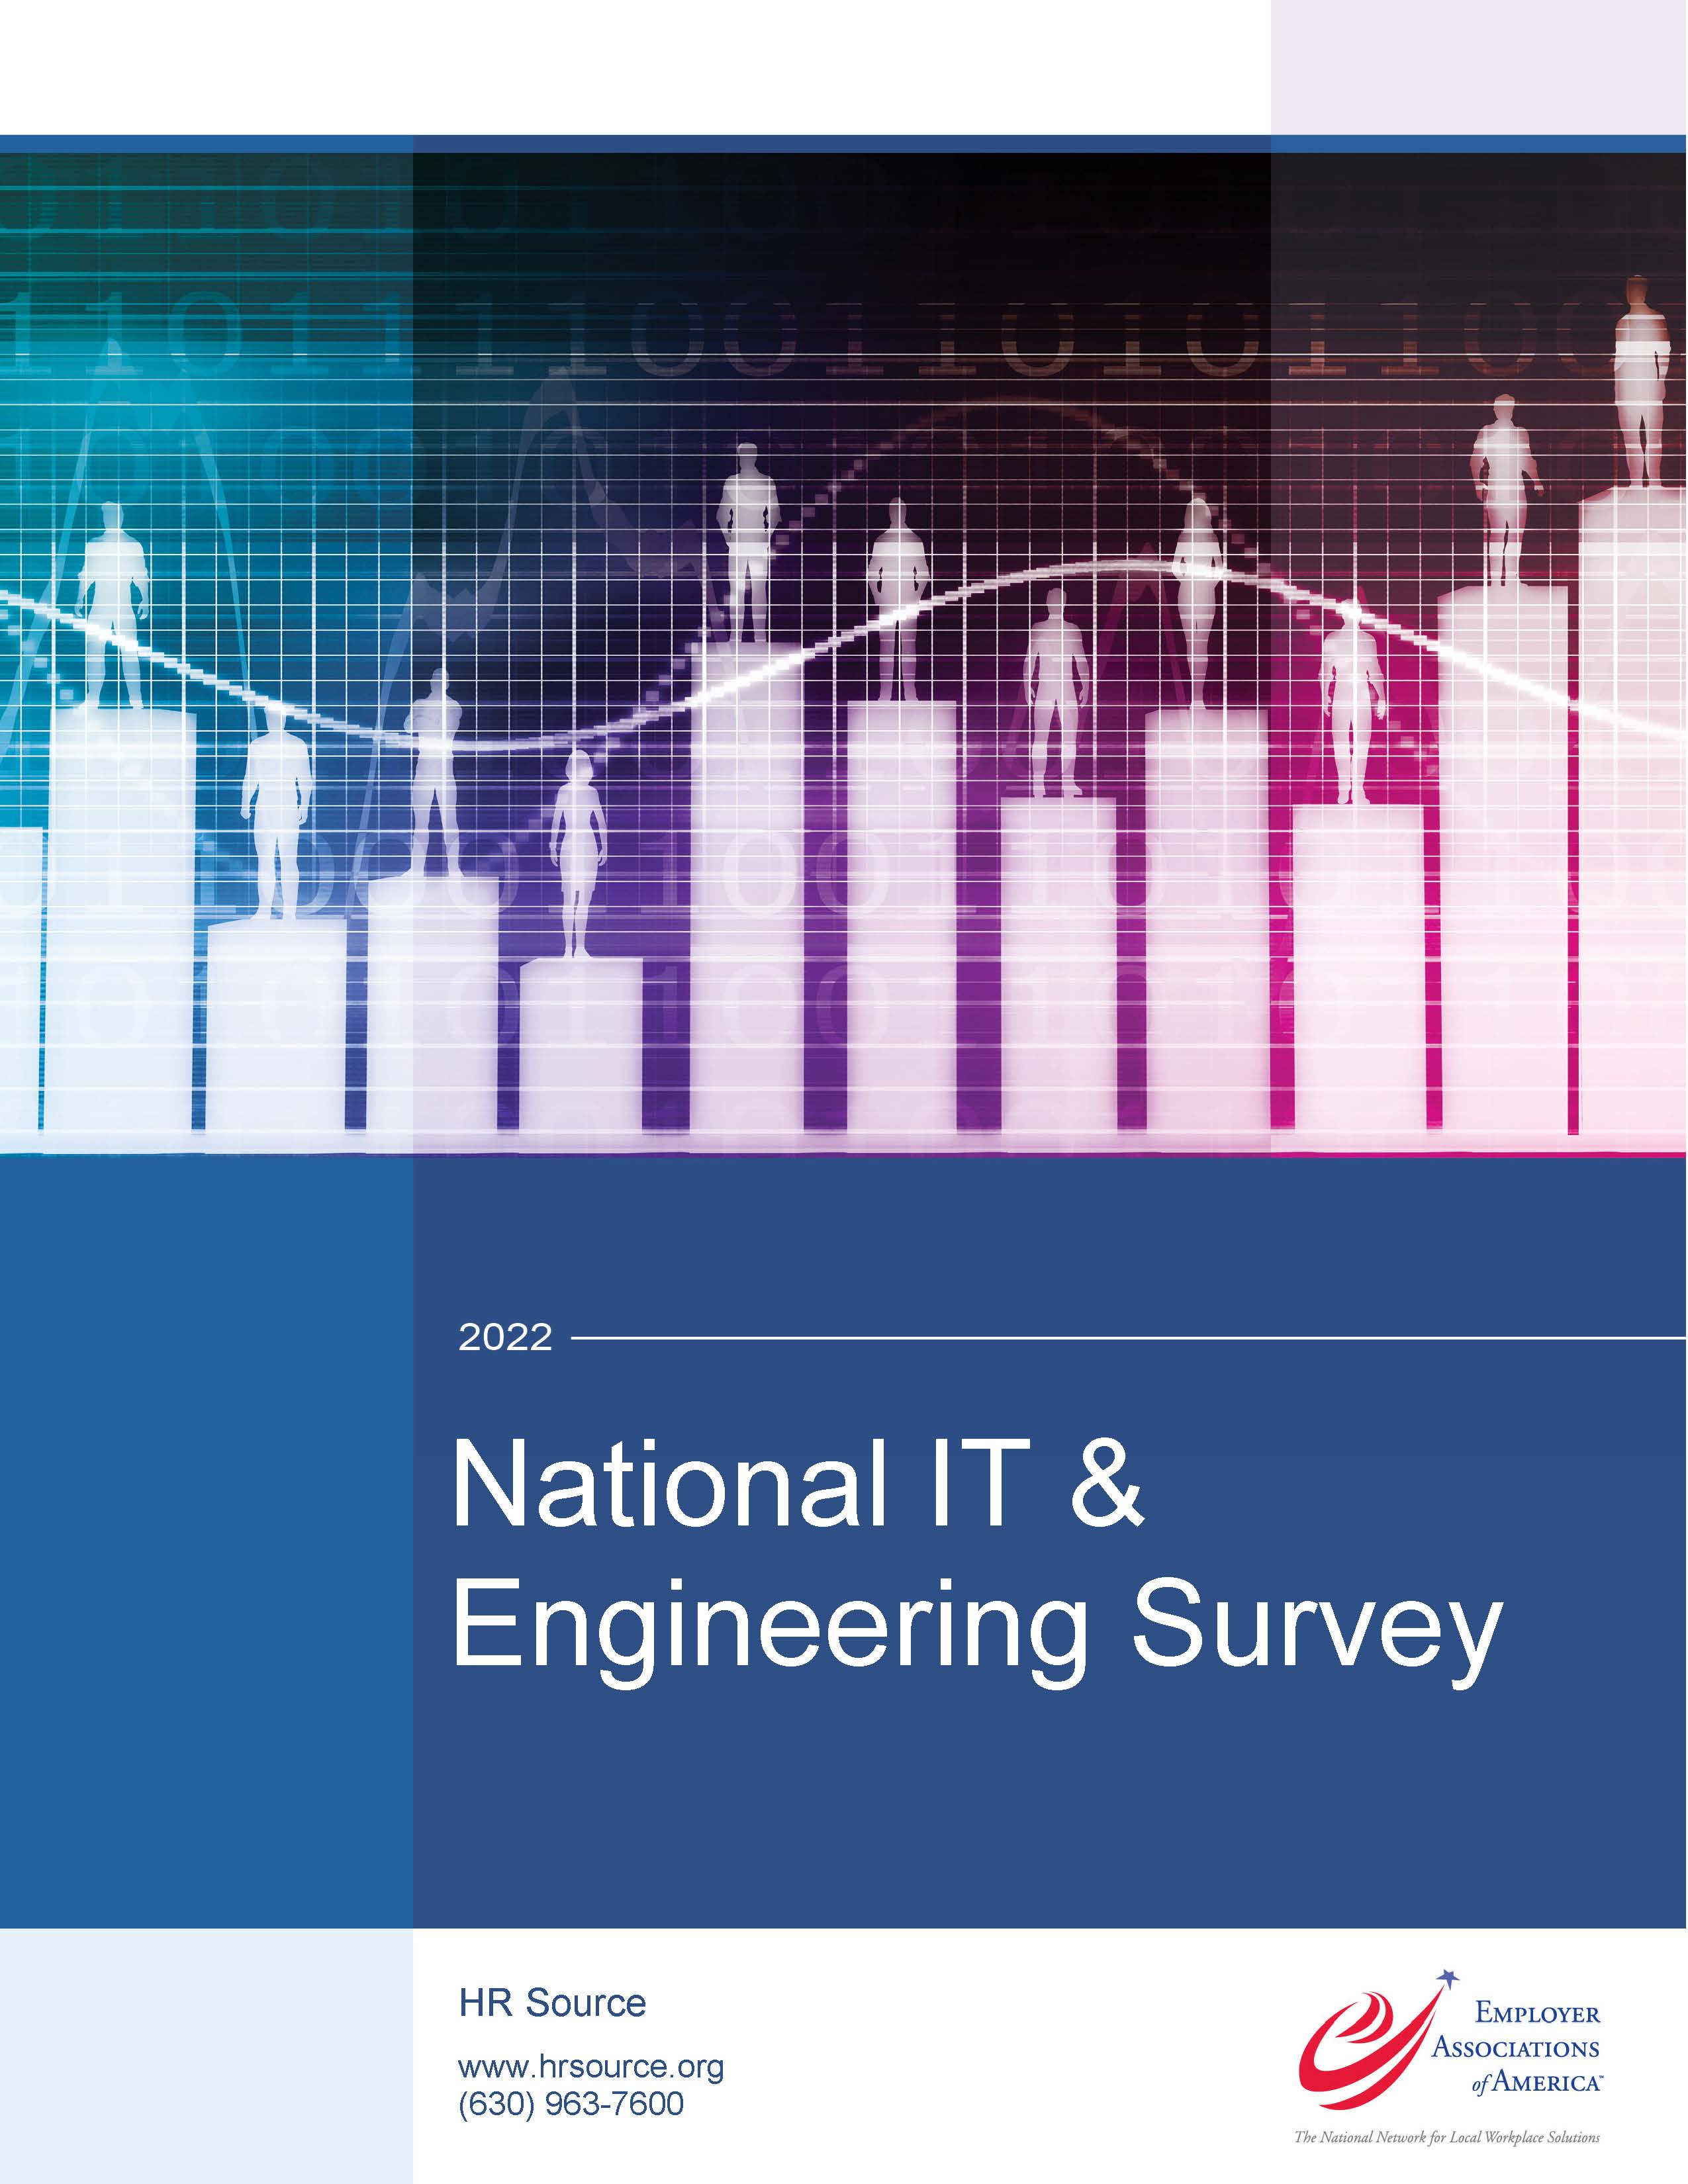 National IT & Engineering Survey Questionnaire Cover